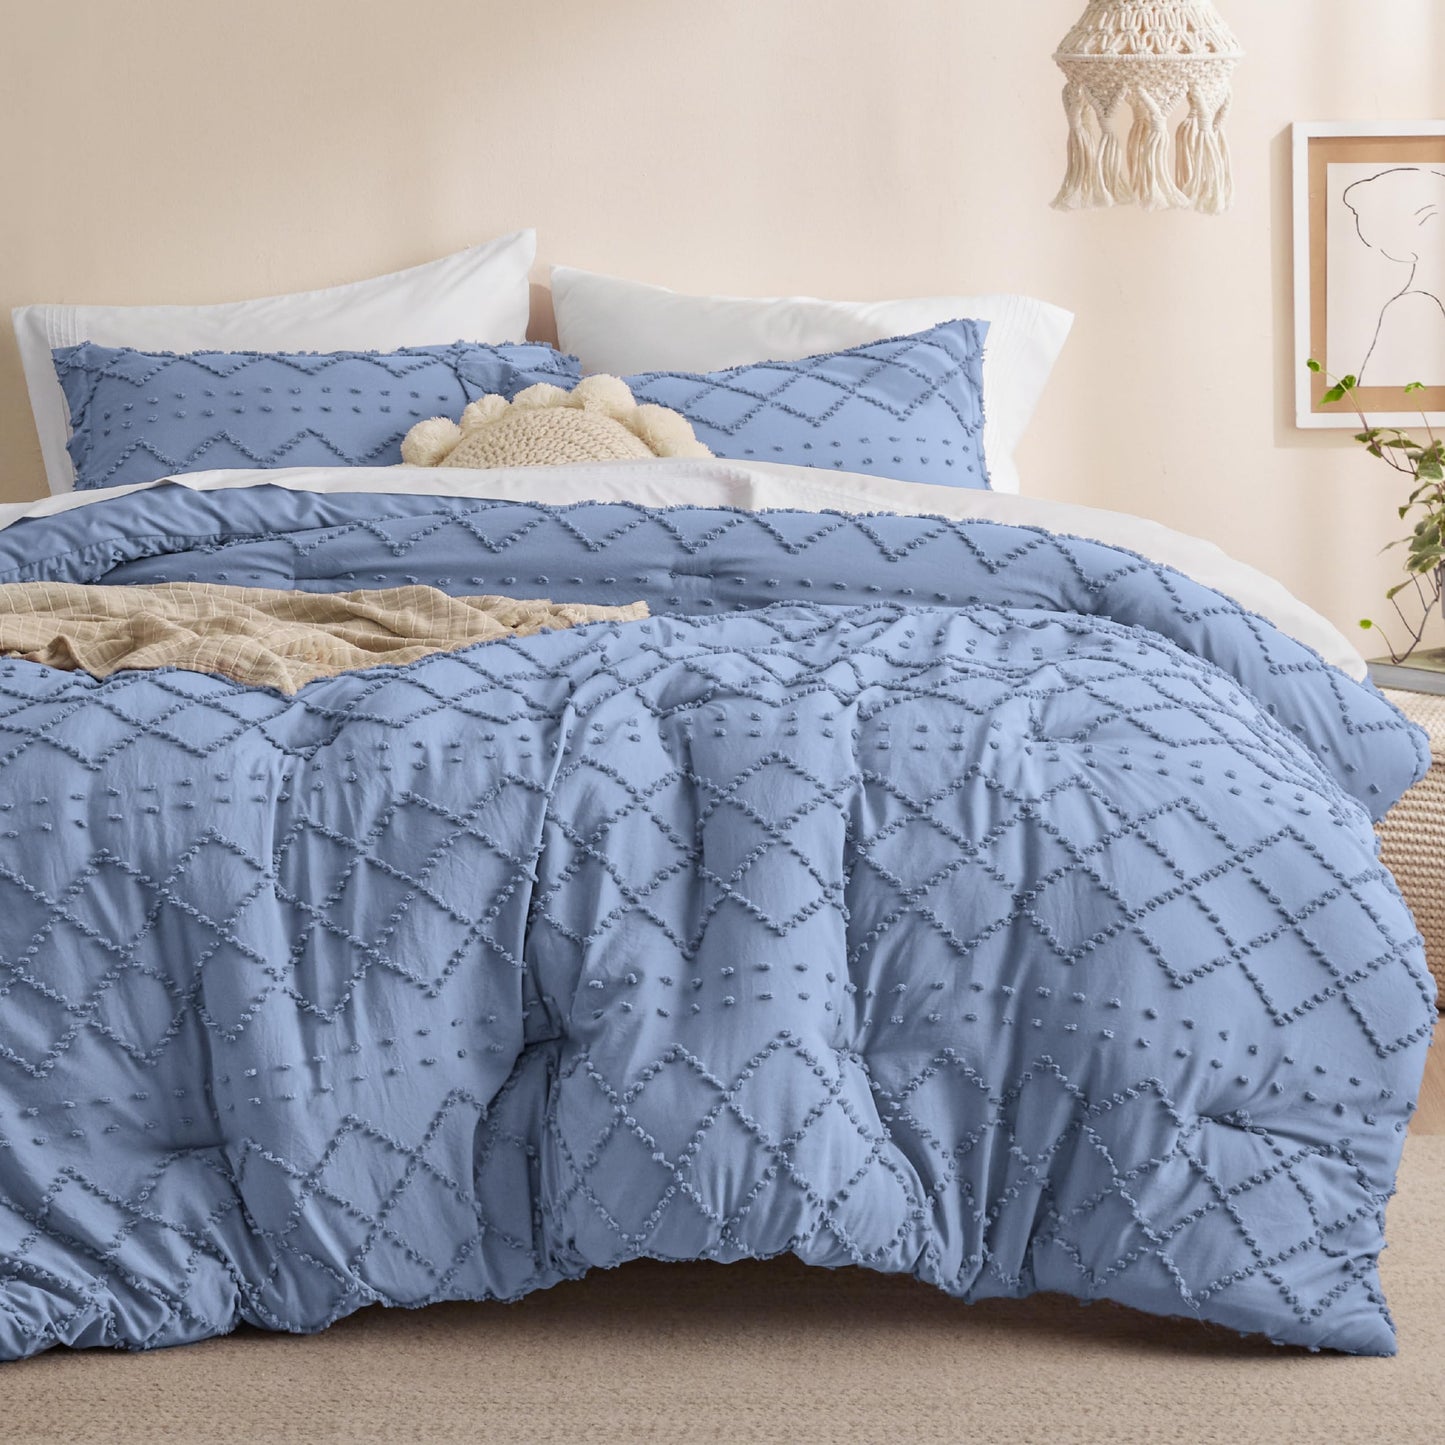 Bedsure Queen Comforter Set - Mineral Blue Comforter, Boho Tufted Shabby Chic Bedding Comforter Set, 3 Pieces Vintage Farmhouse Bed Set for All Seasons, Fluffy Soft Bedding Set with 2 Pillow Shams